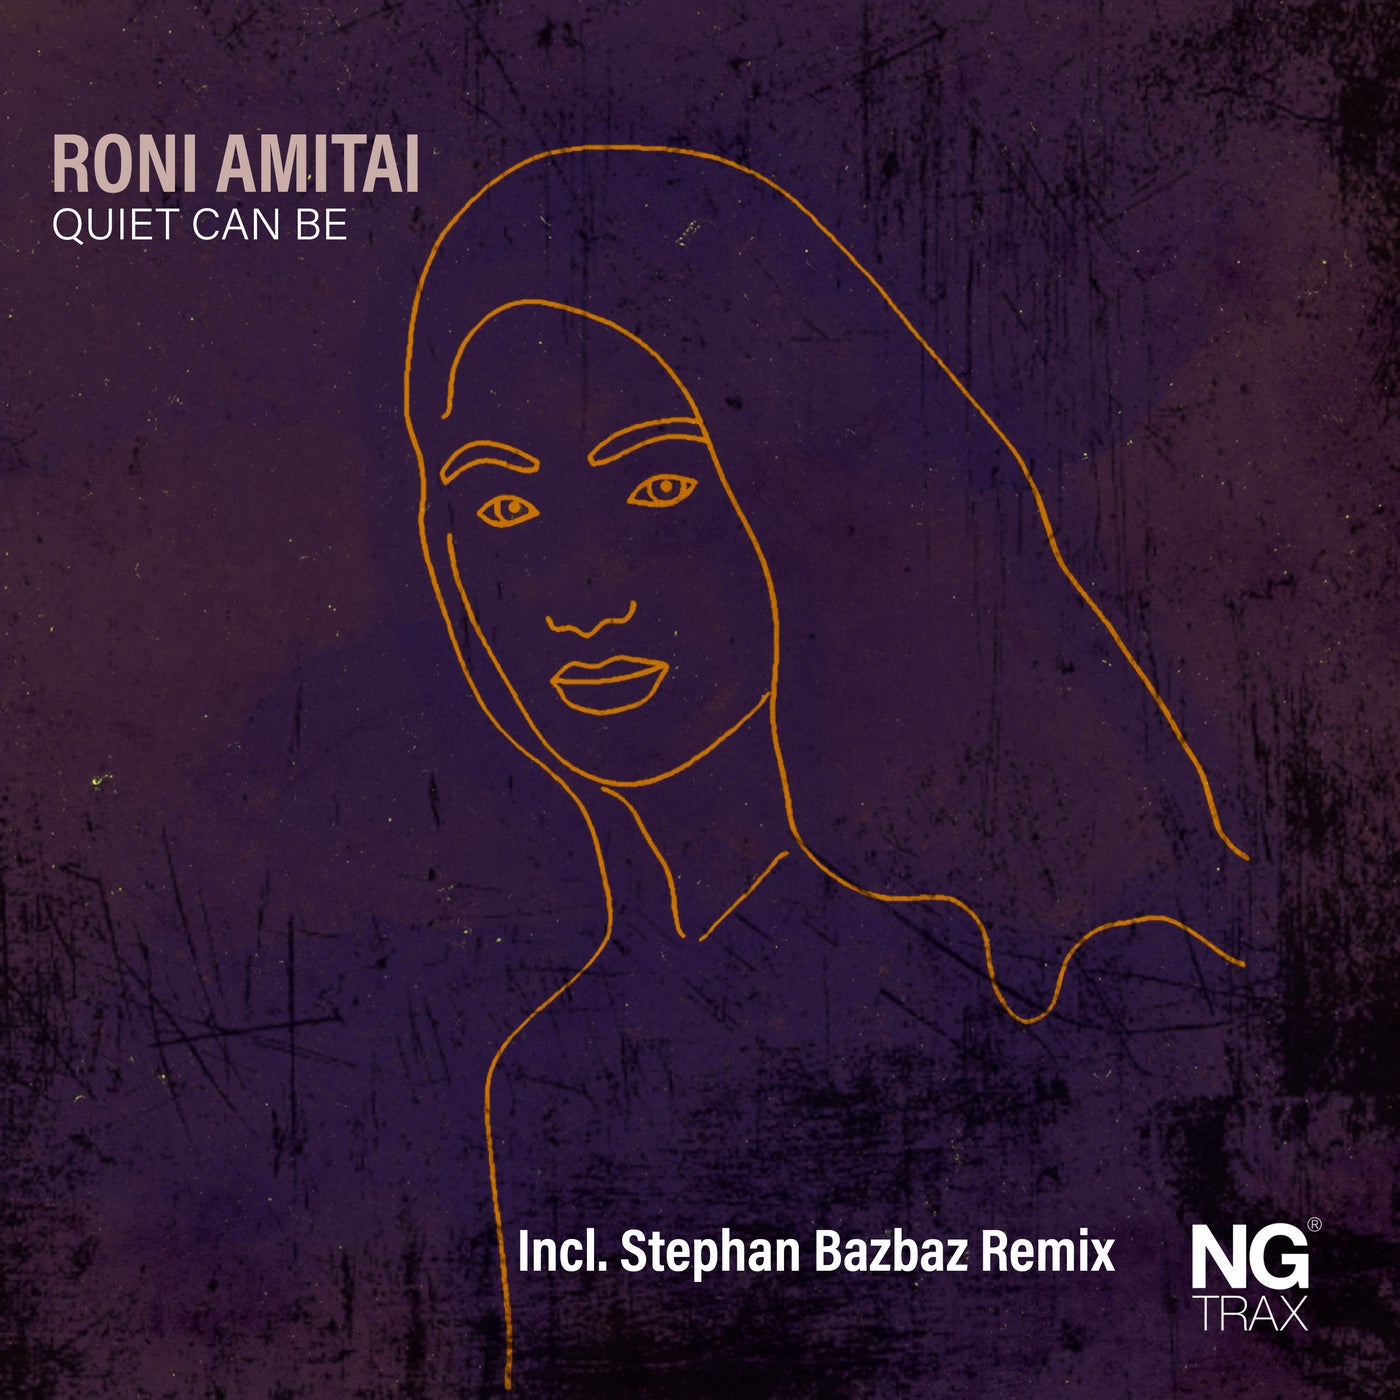 image cover: Roni Amitai, Danielle Mazuz - Quiet Can Be / NGTD017